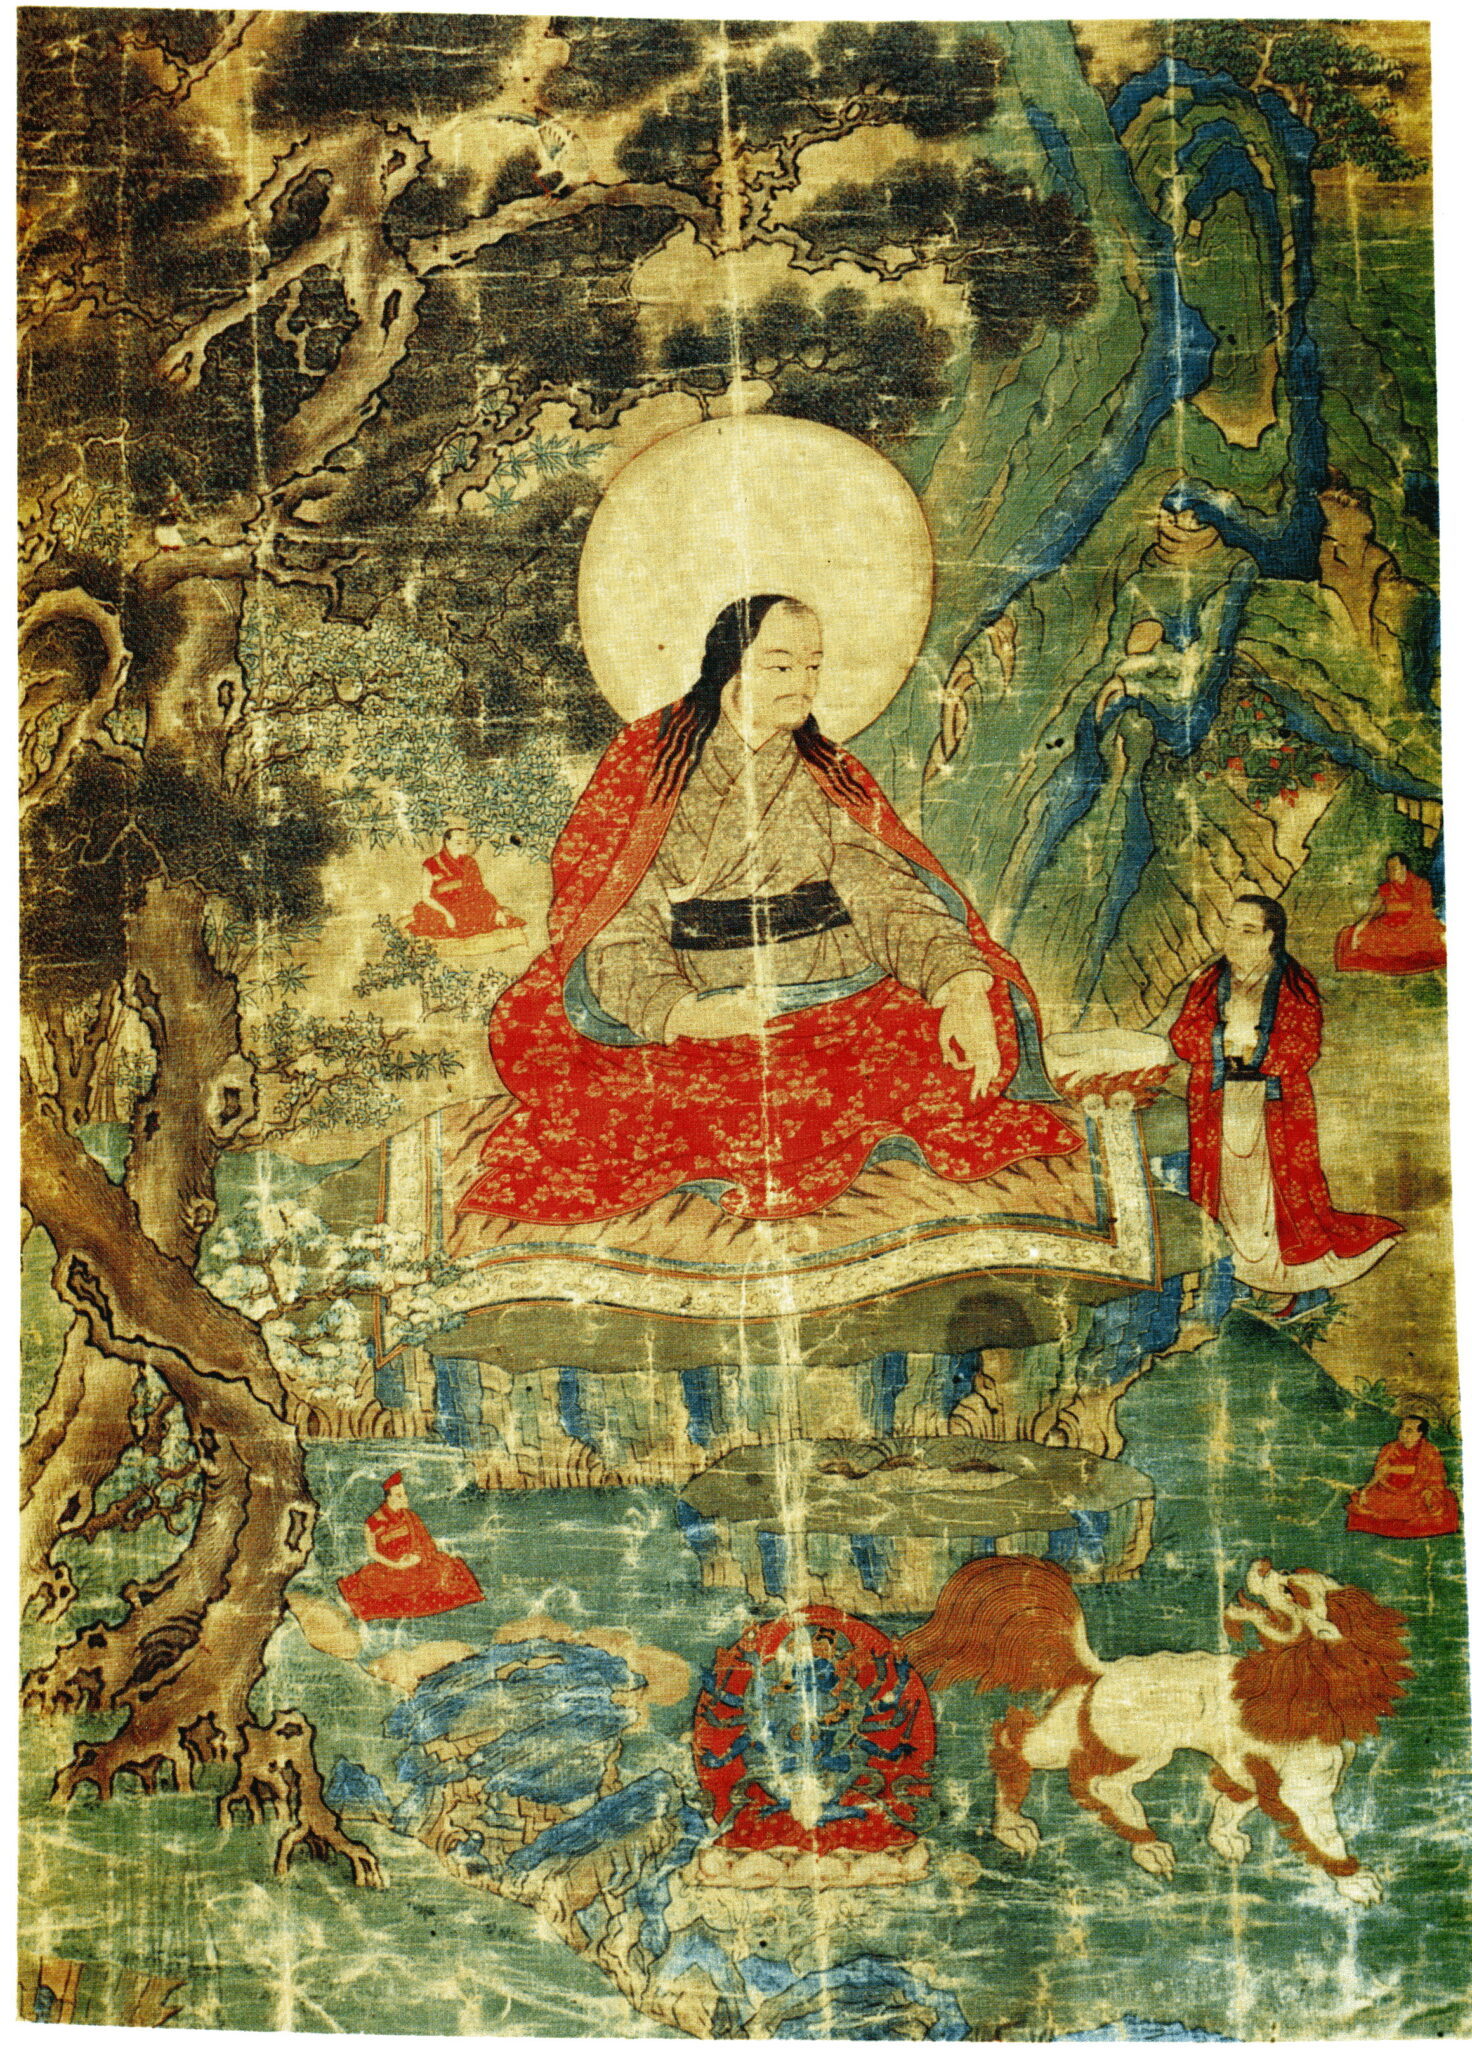 Lama wearing red brocade robe seated before body of water amidst trees, animals, and attendants